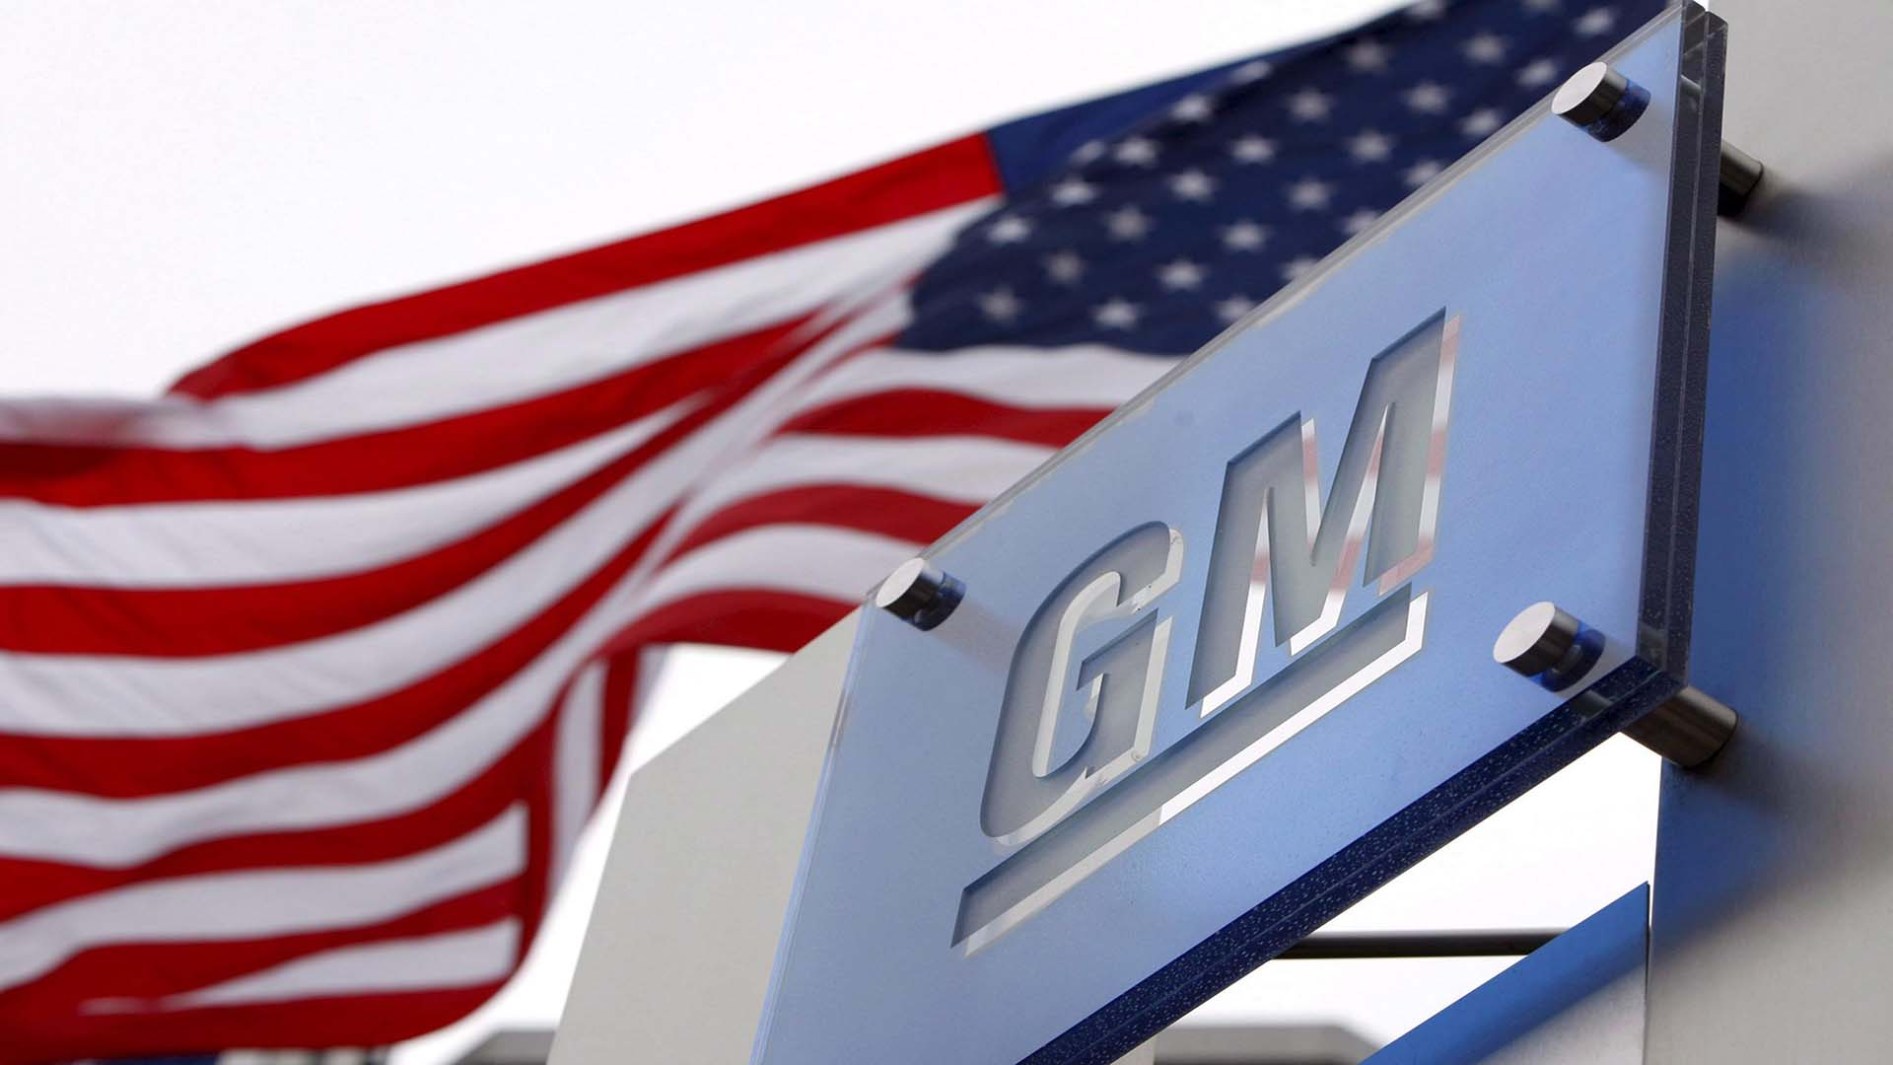 GM spent $10B on stock buybacks, then cut jobs to save $4.5B